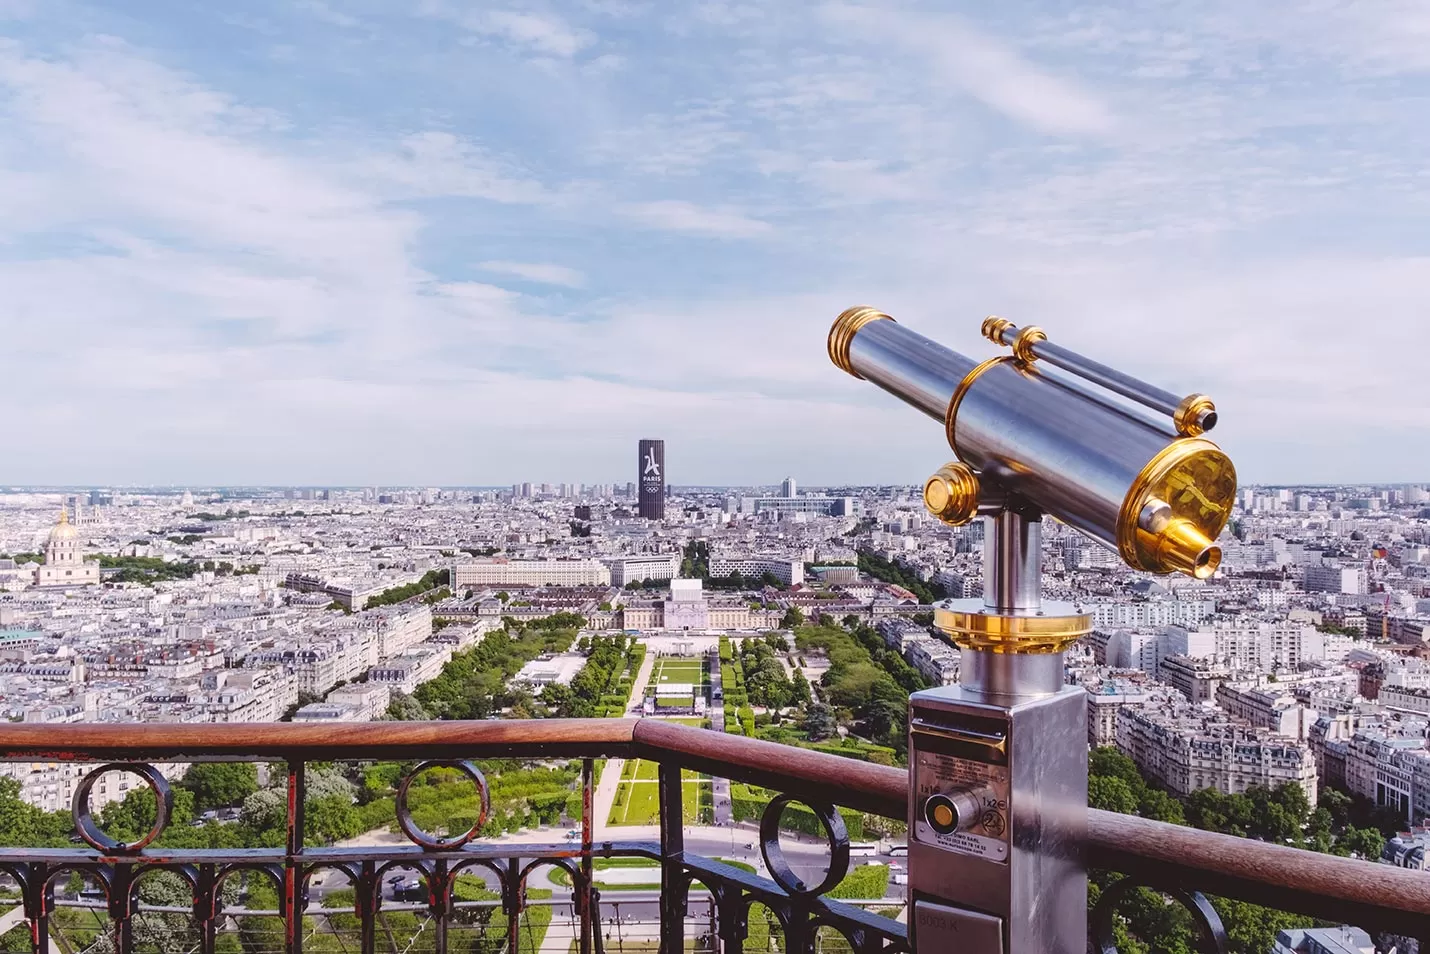 paris itinerary 4 days - what to do in paris in 4 days - on top of eiffel tower